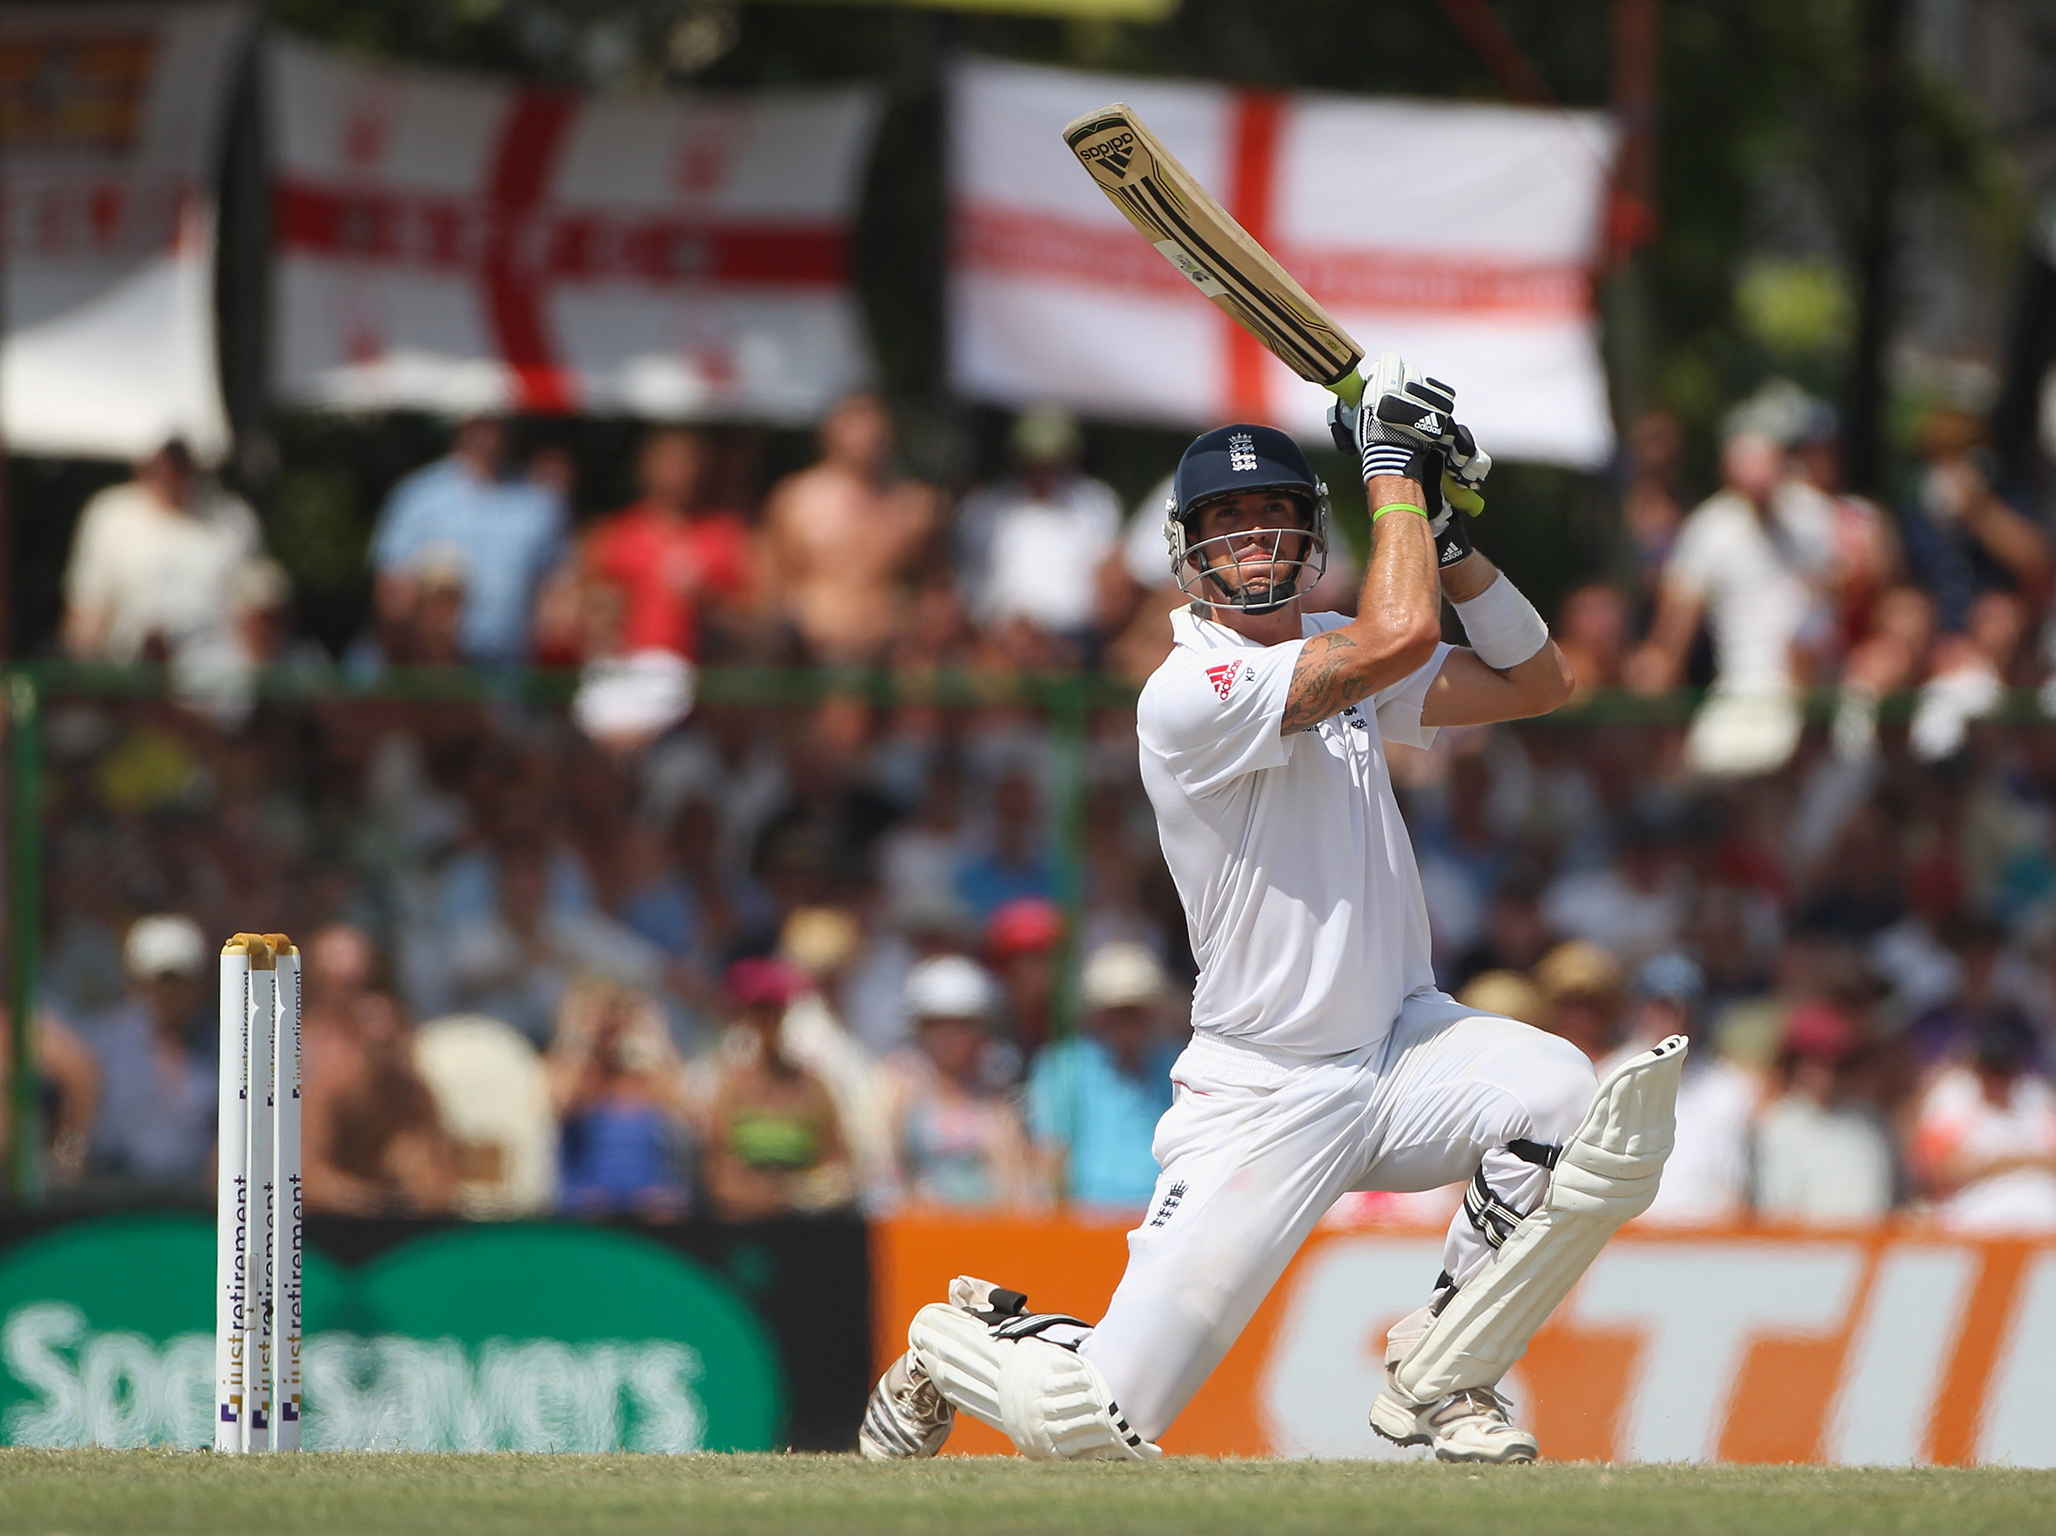 Pietersen pictured in what he considered his greatest Test innings, against Sri Lanka in Colombo in 2012